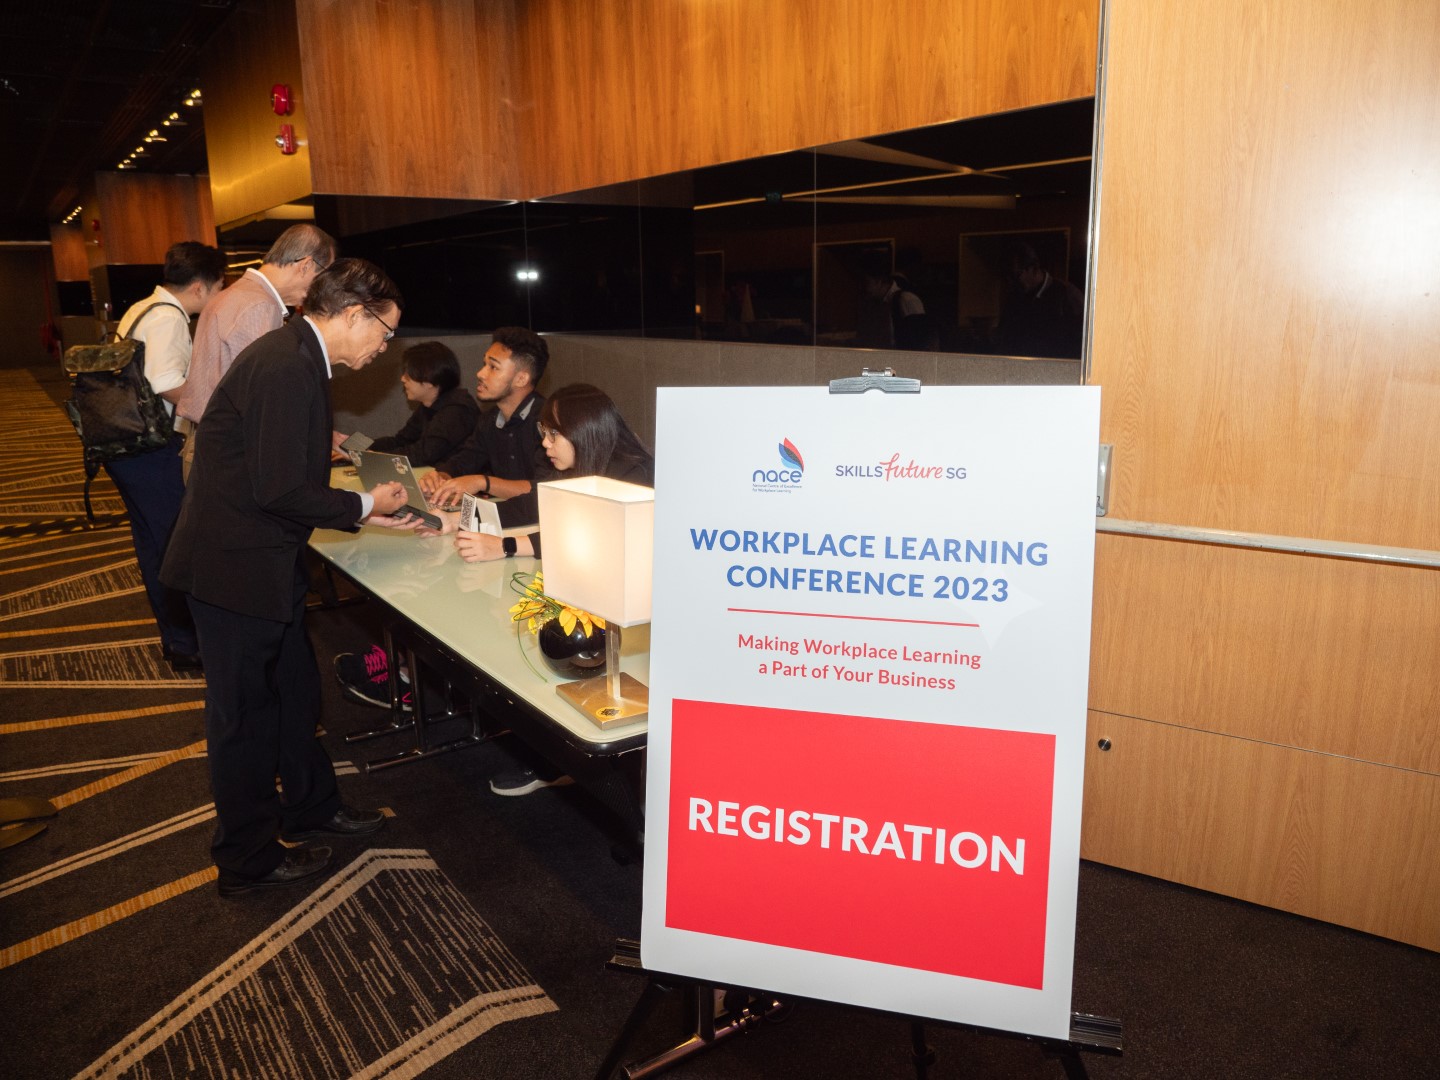 Workplace Learning Conference 2023